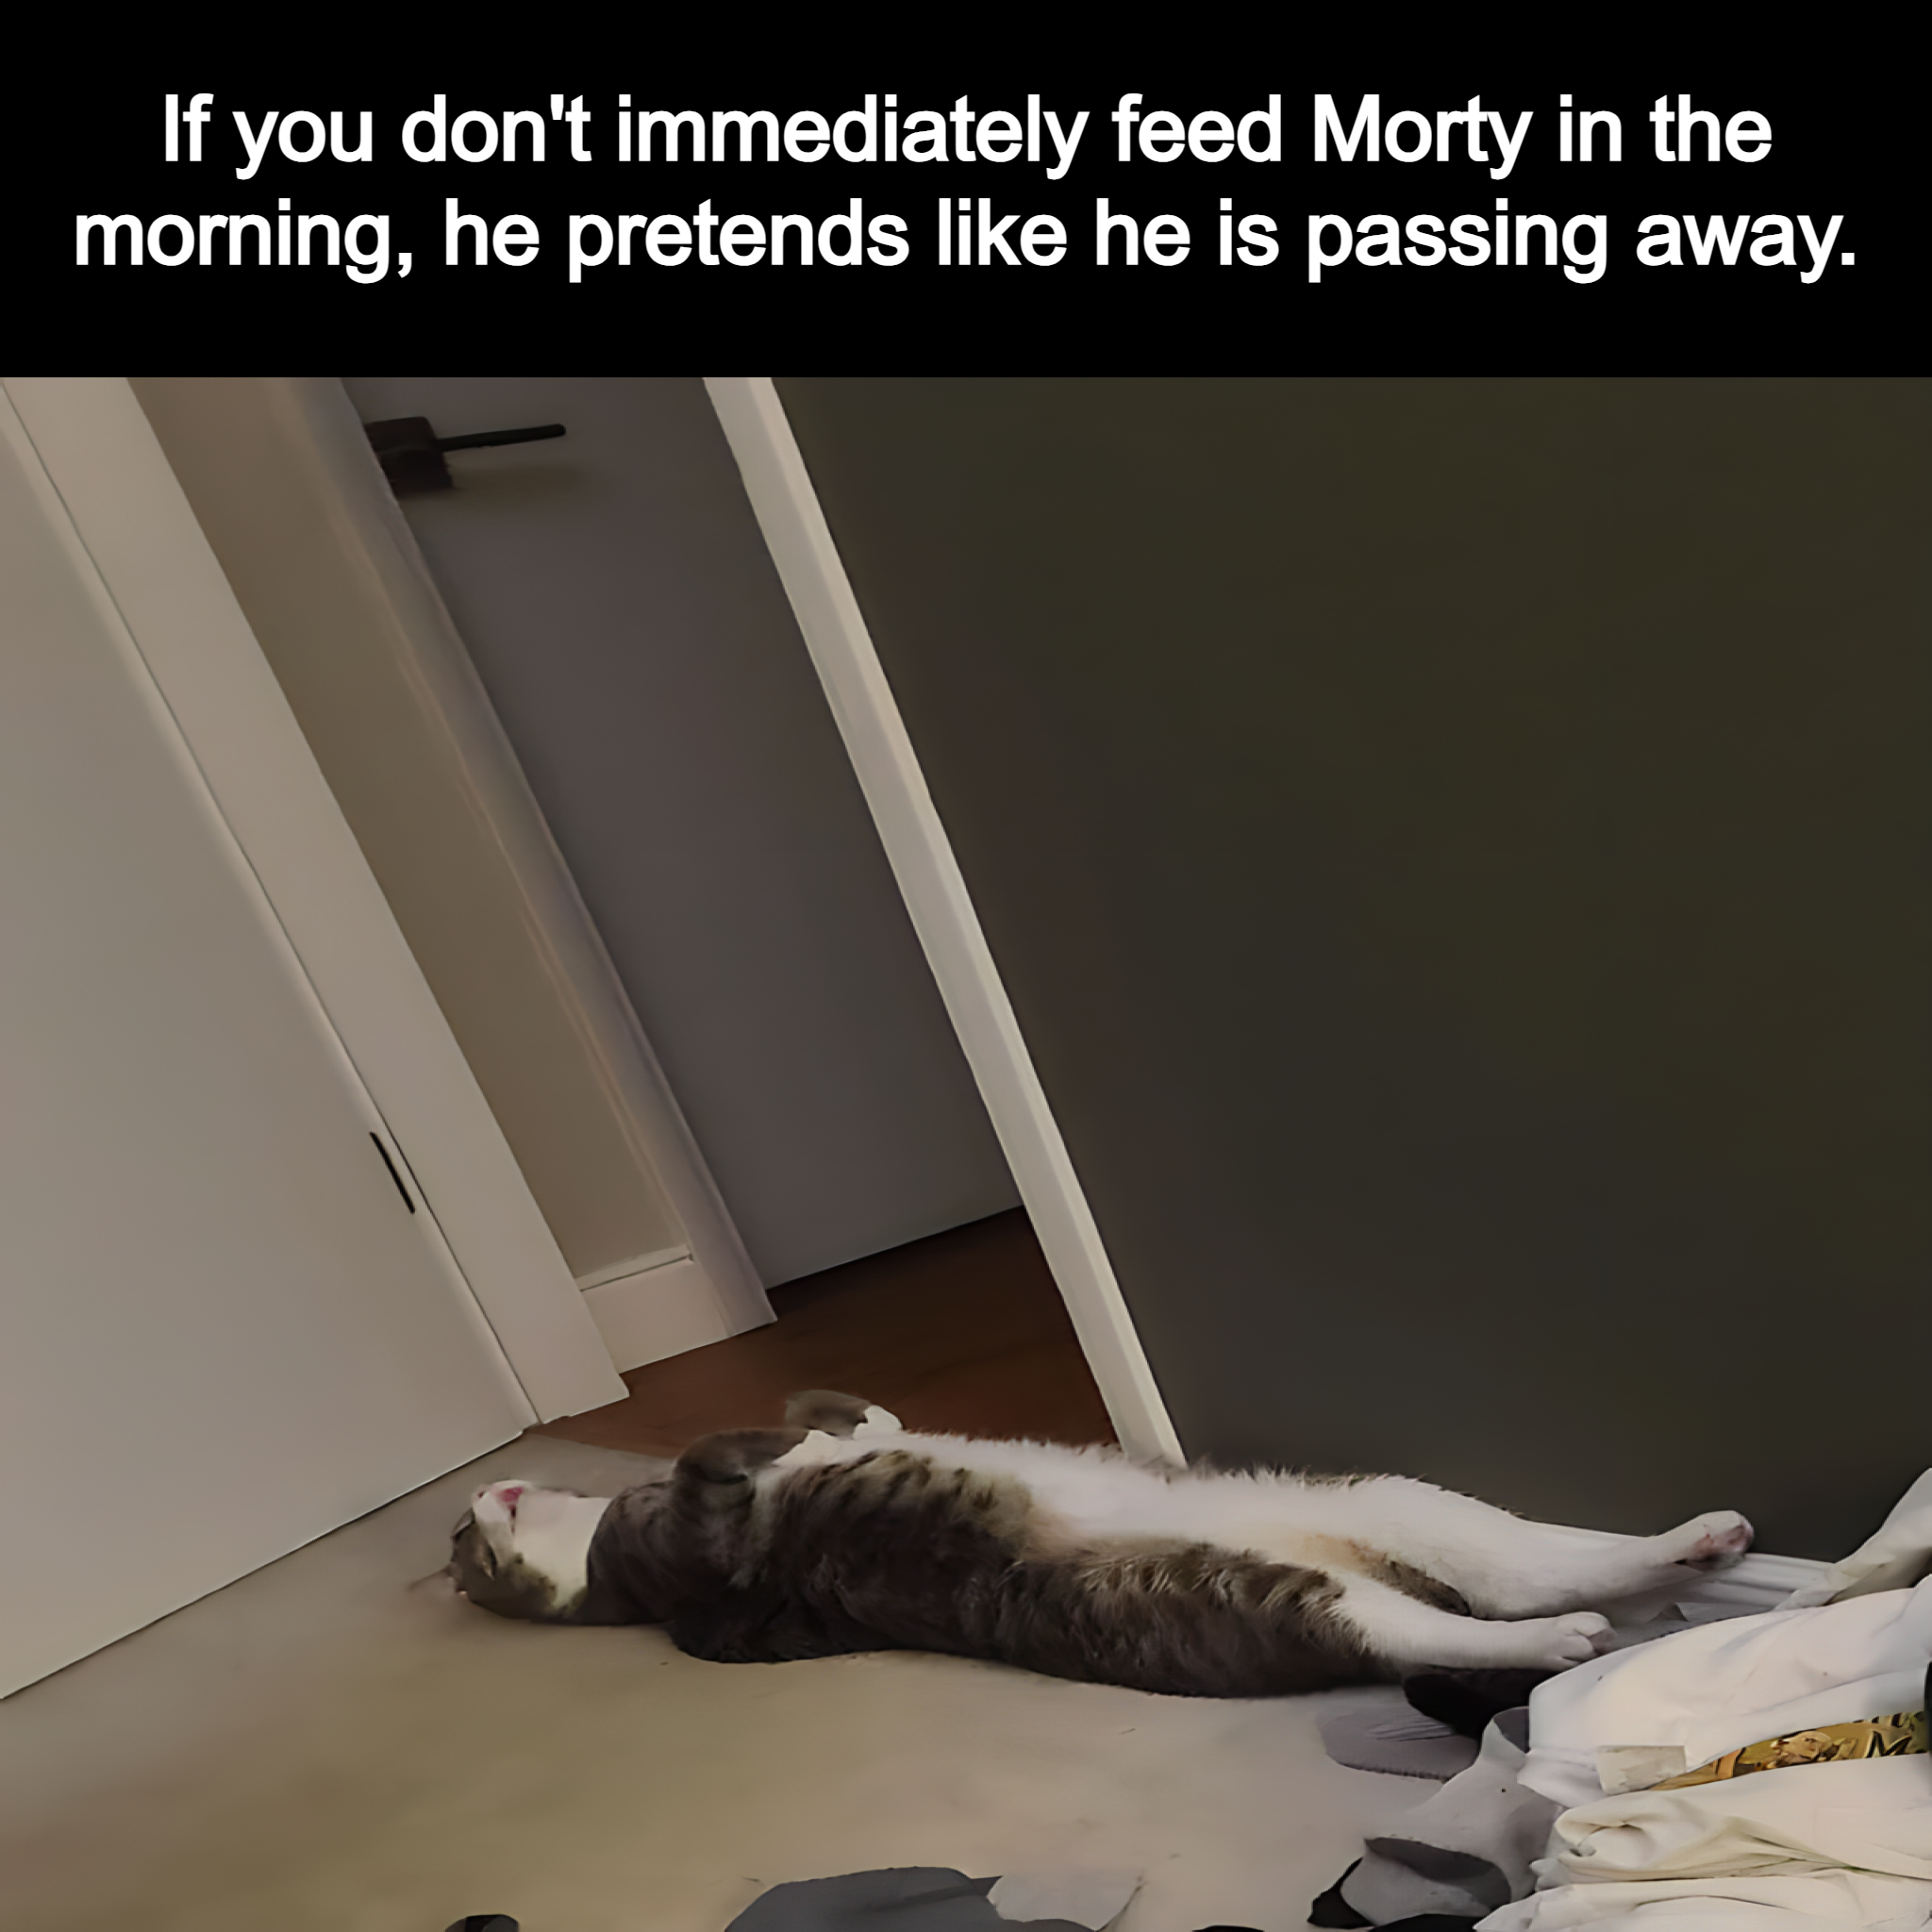 If you don’t feed Morty.